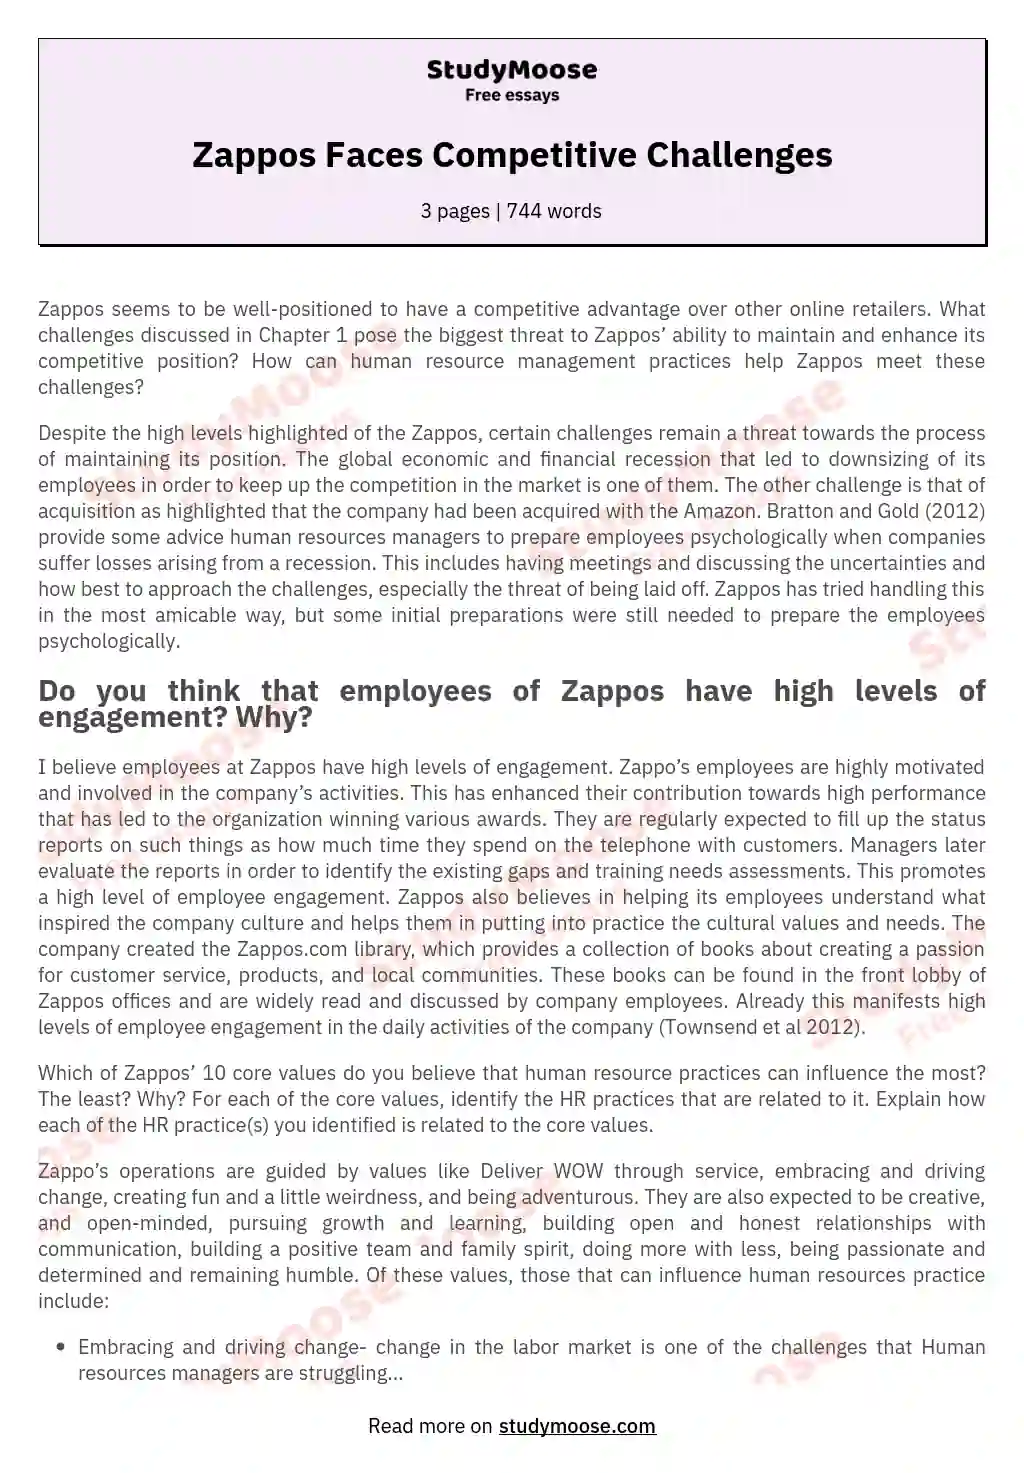 Zappos Faces Competitive Challenges essay